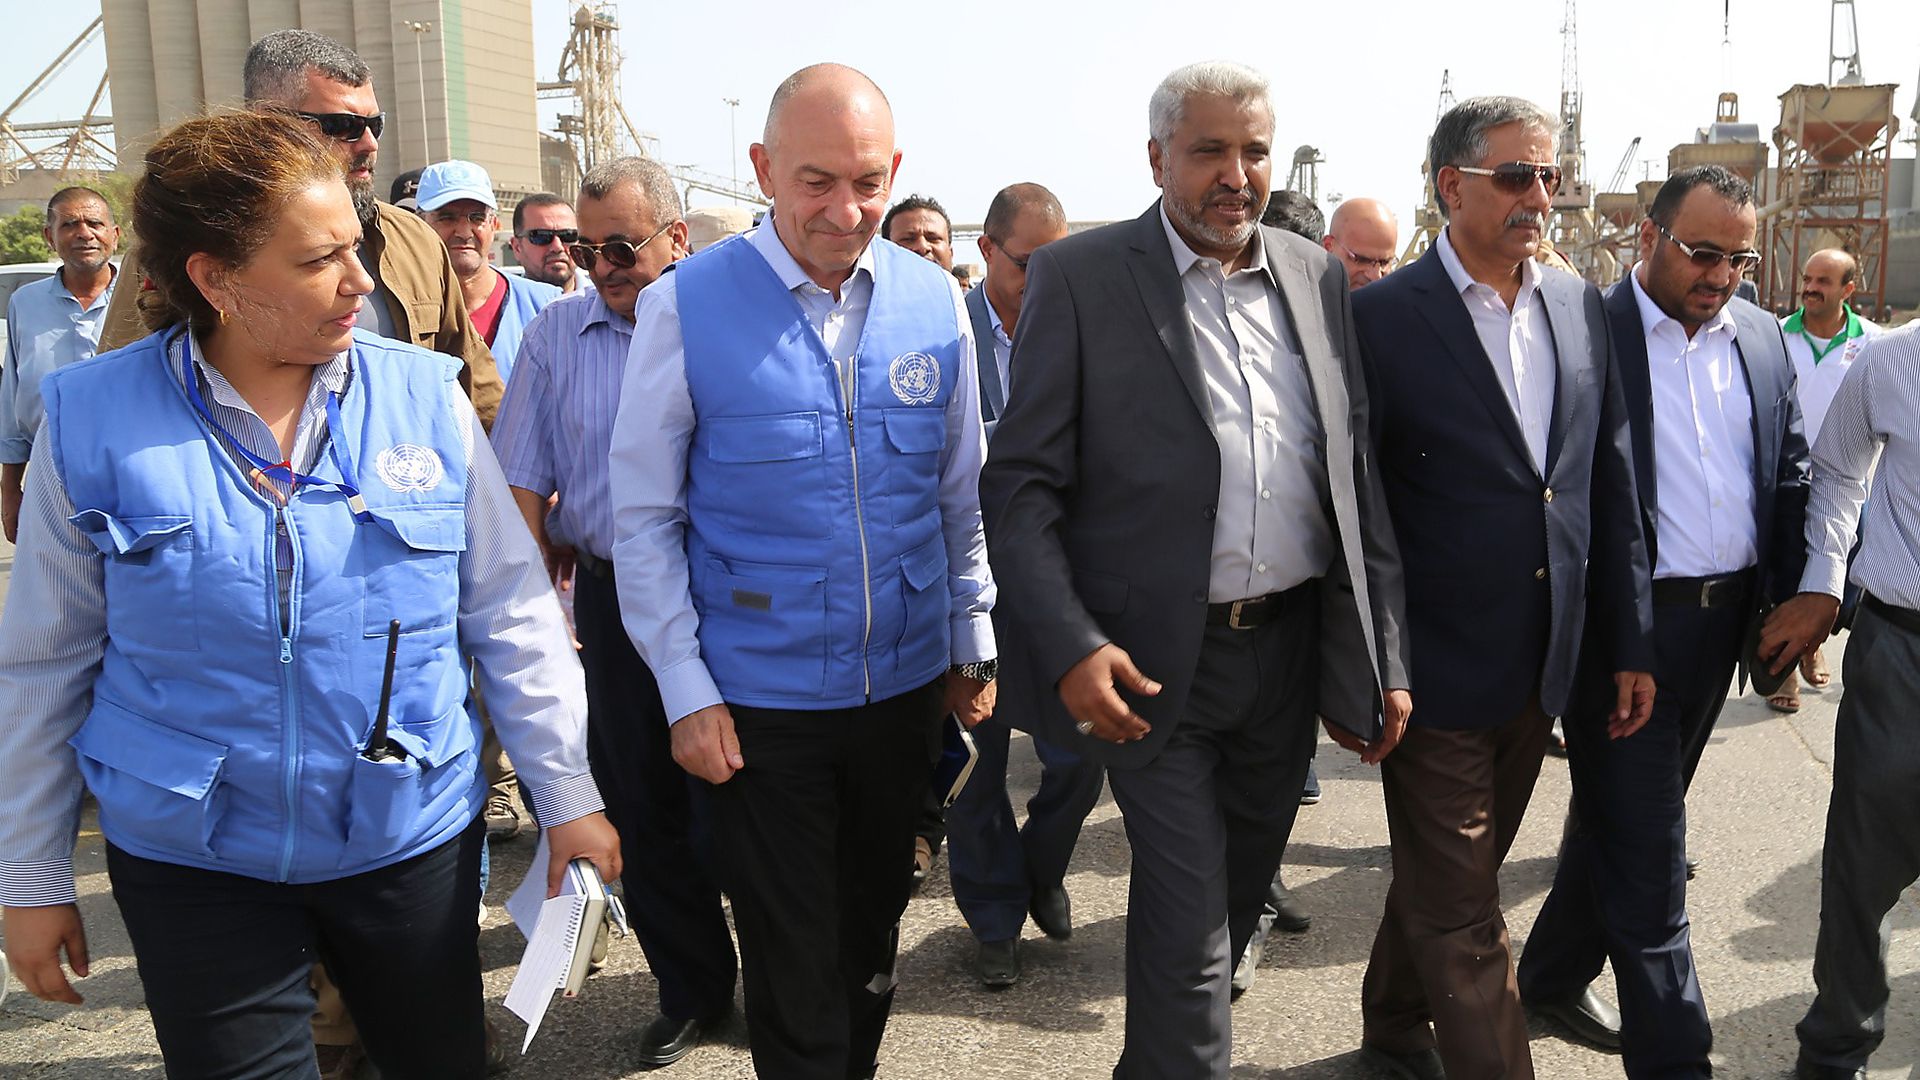 UN peacekeepers and acting governor of Hodeidah walking near port